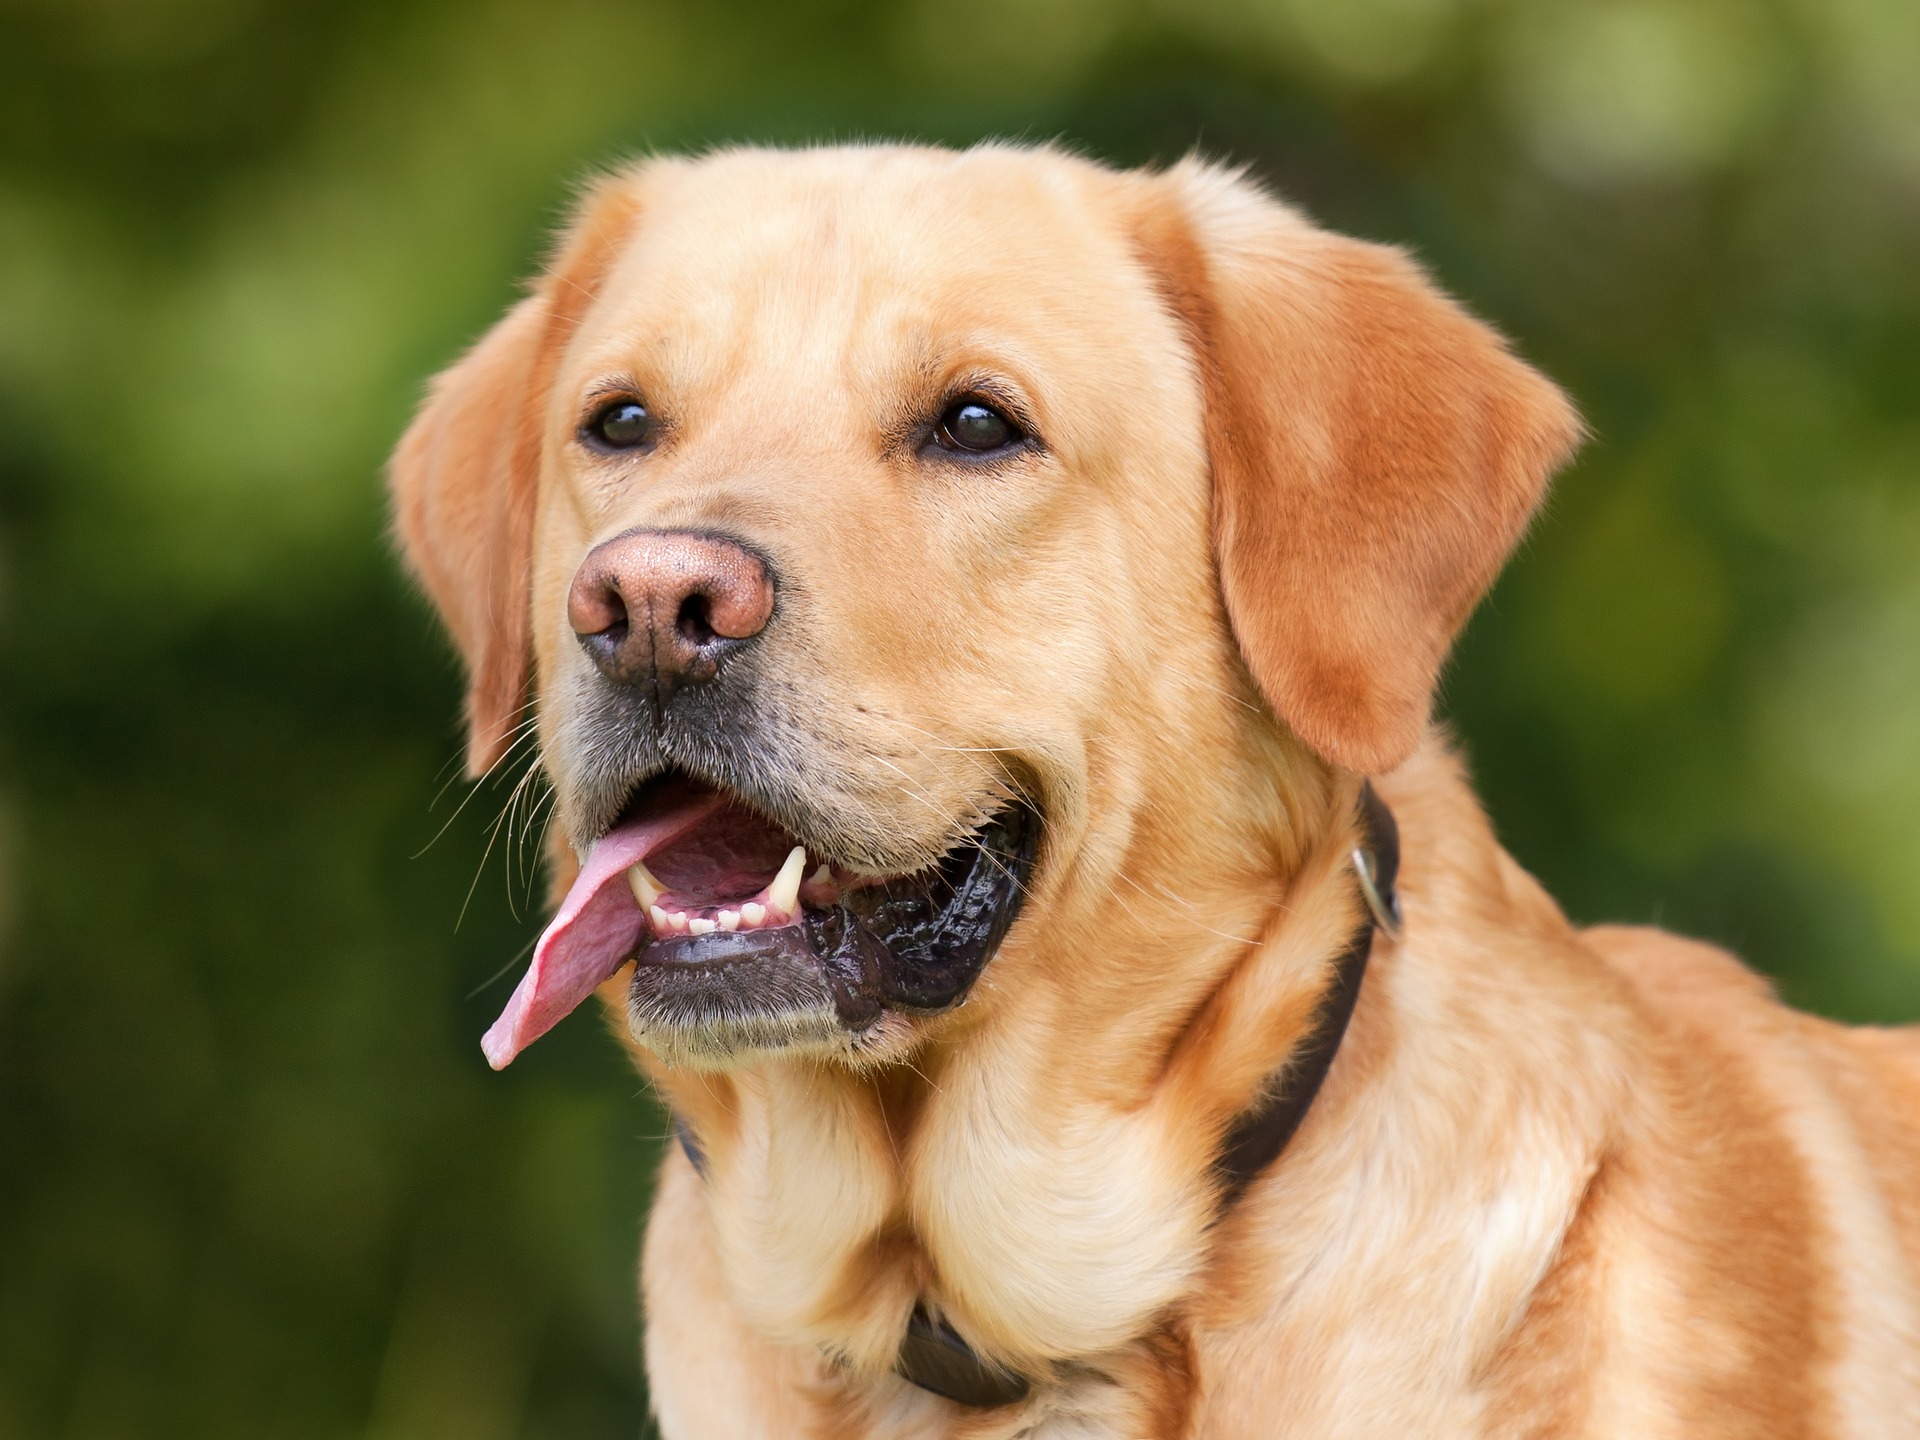 Dog Bite Claims – Don’t Make These Common Mistakes